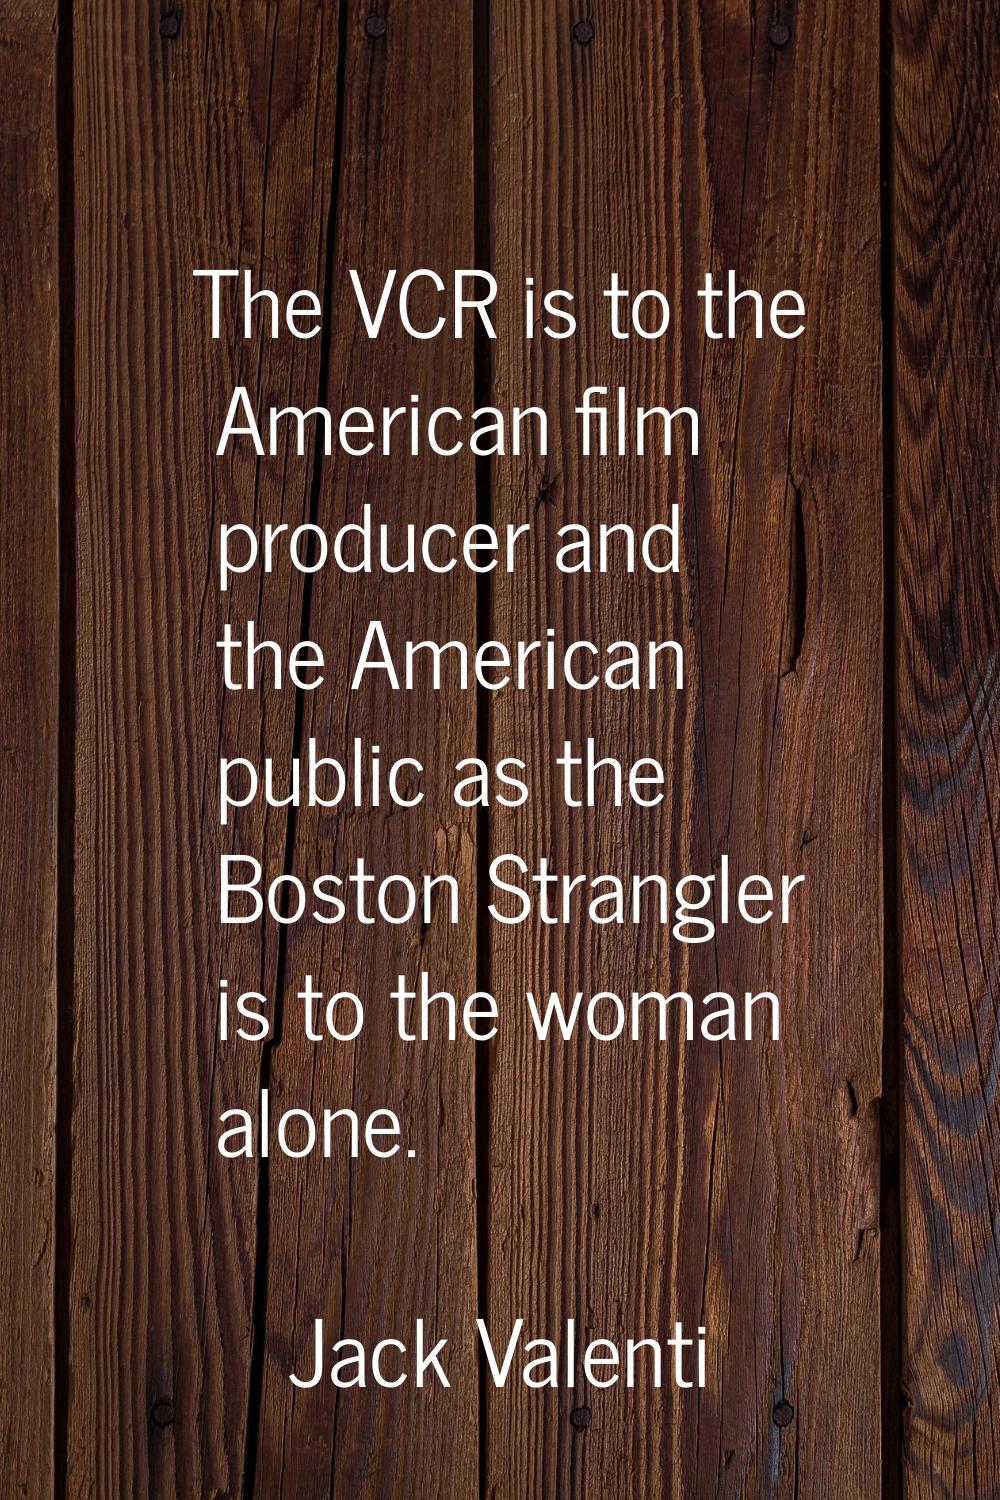 The VCR is to the American film producer and the American public as the Boston Strangler is to the 